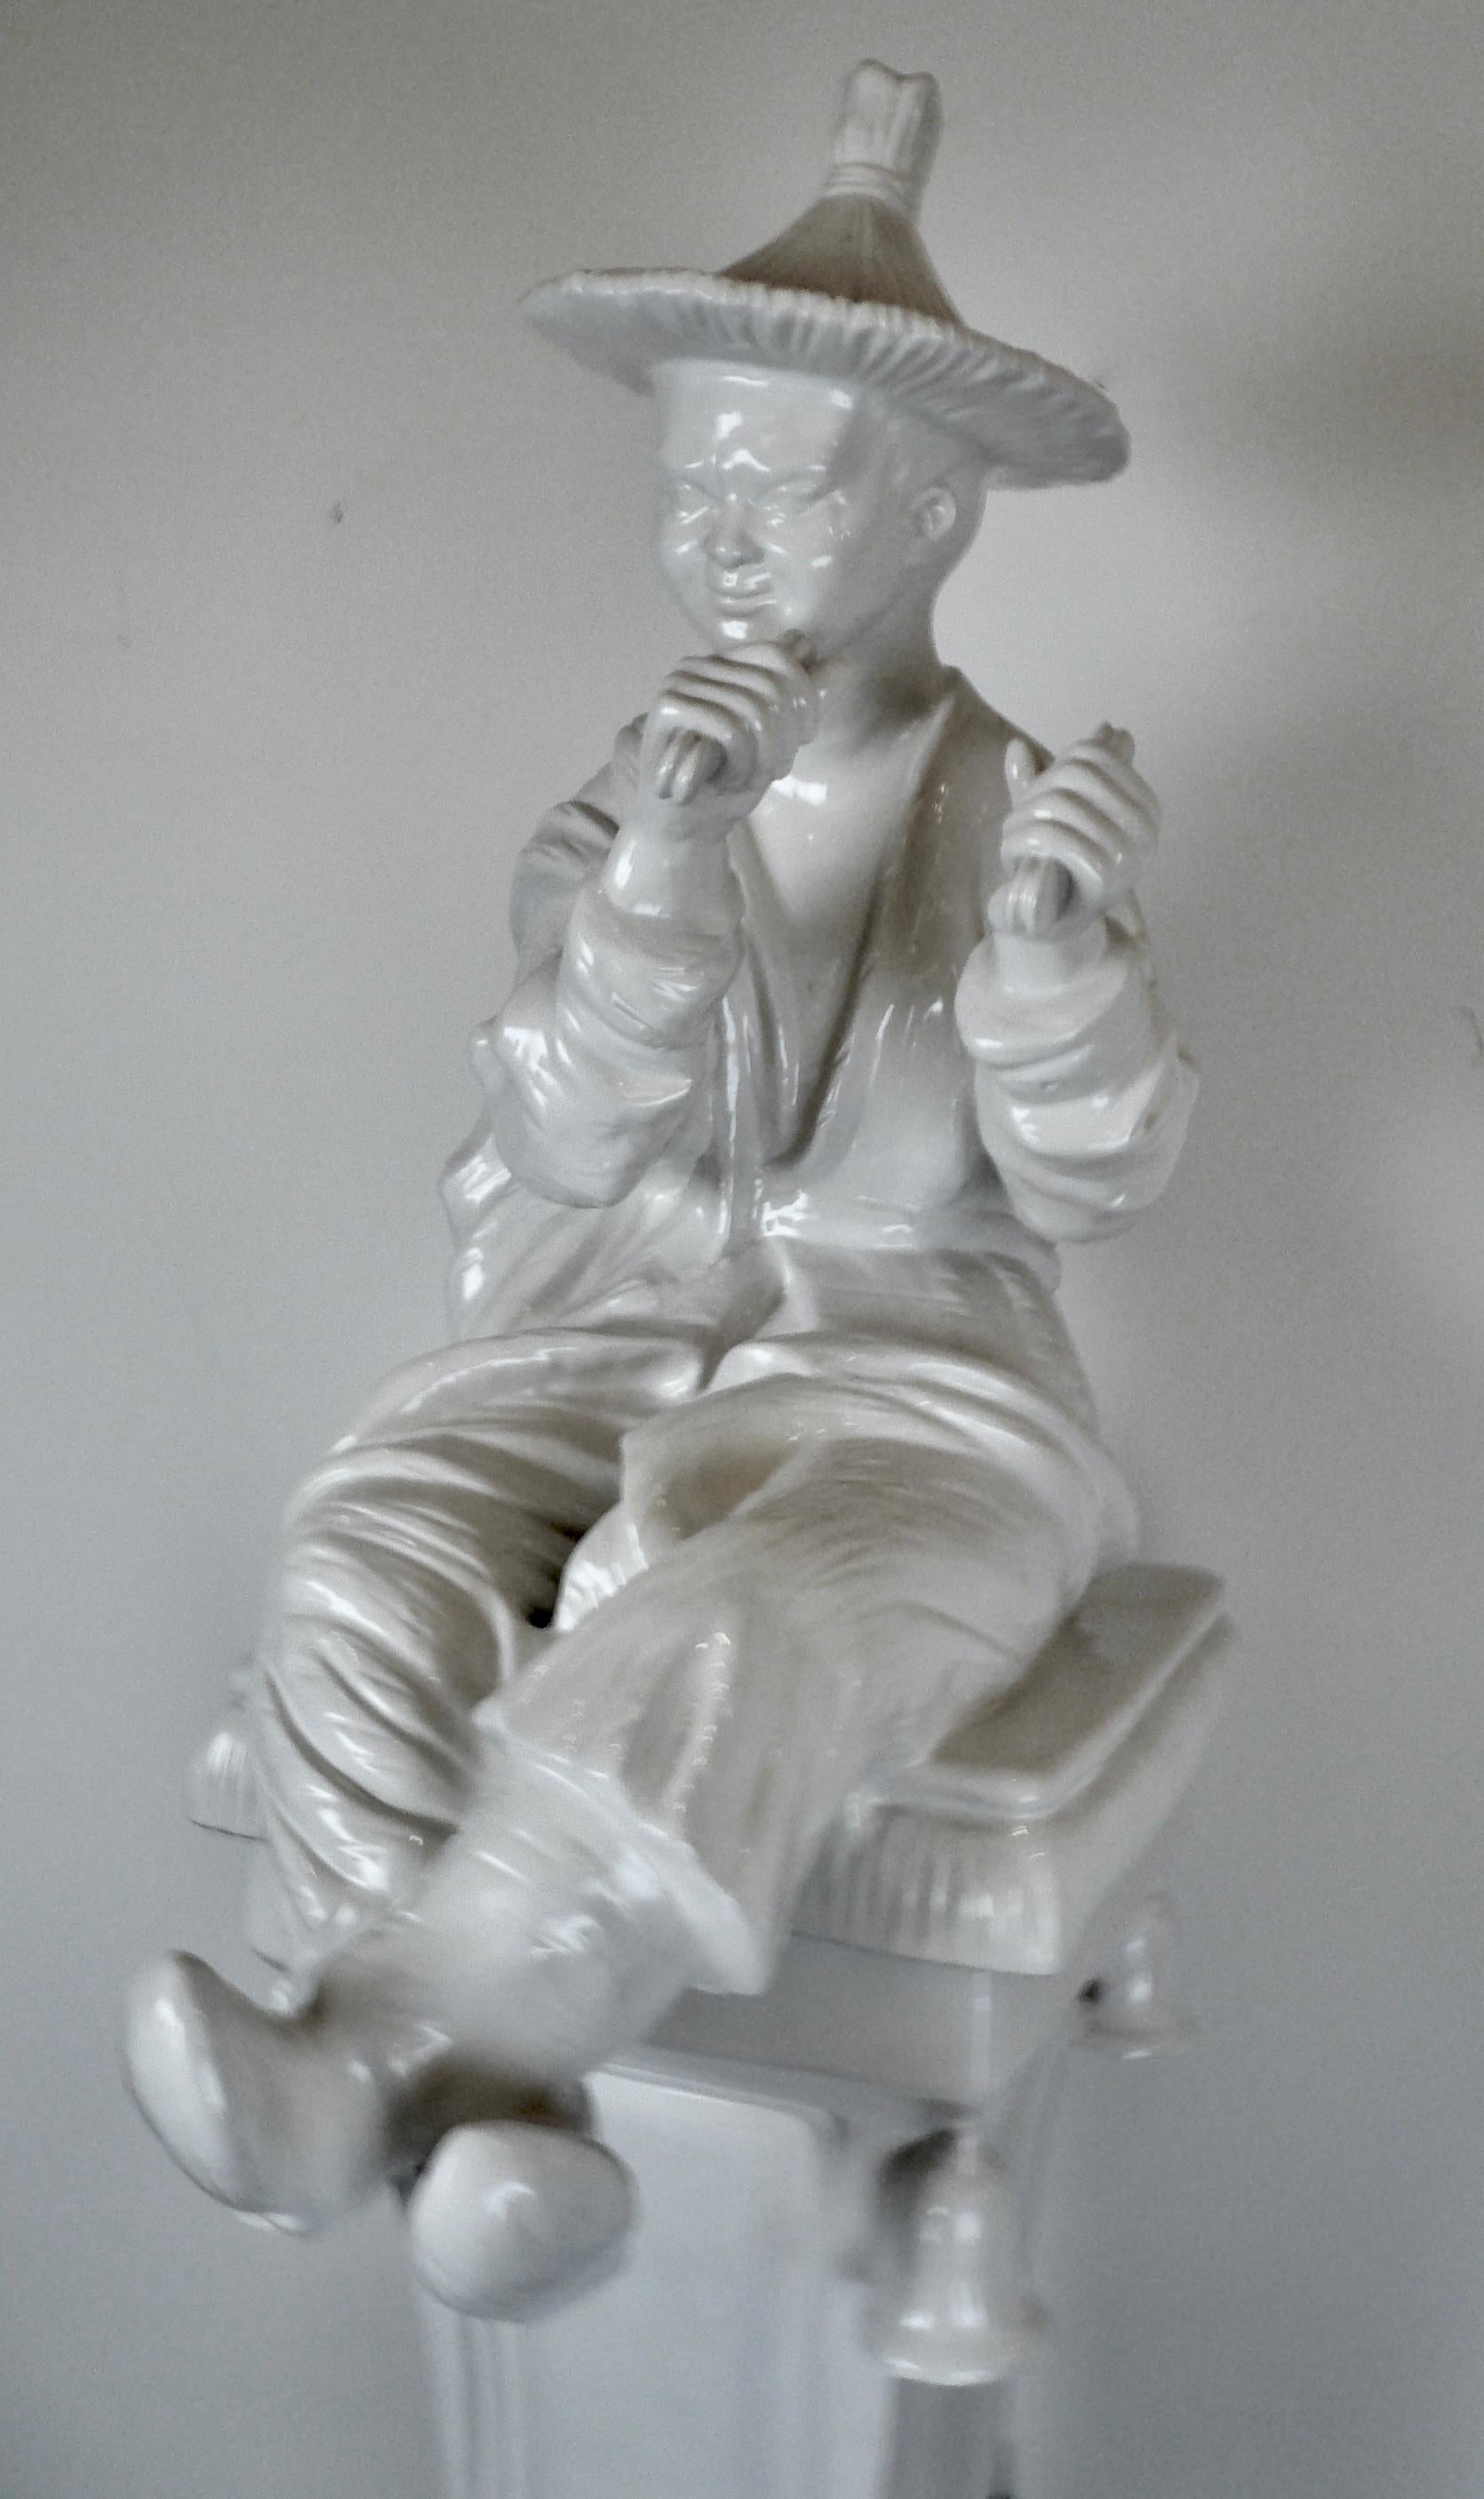 20th Century Large Ceramic Blanc de Chine Figure of a Chinese Musician on Pedestal